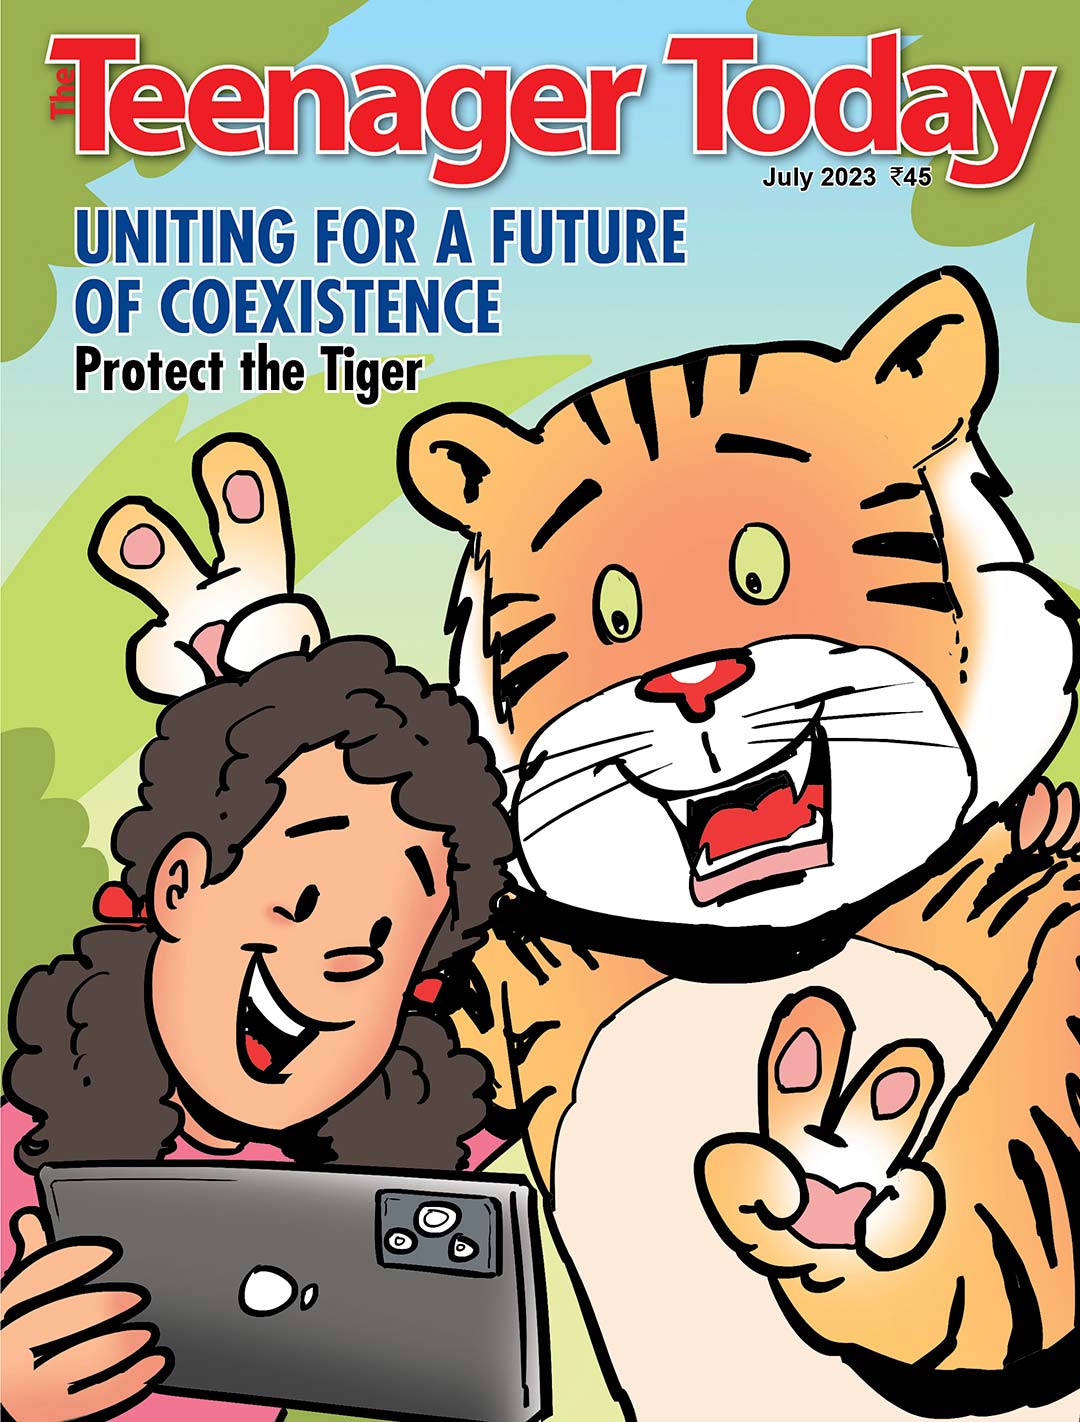 Cover of the July 2023 issue of The Teenager Today featuring International Tigers Day.